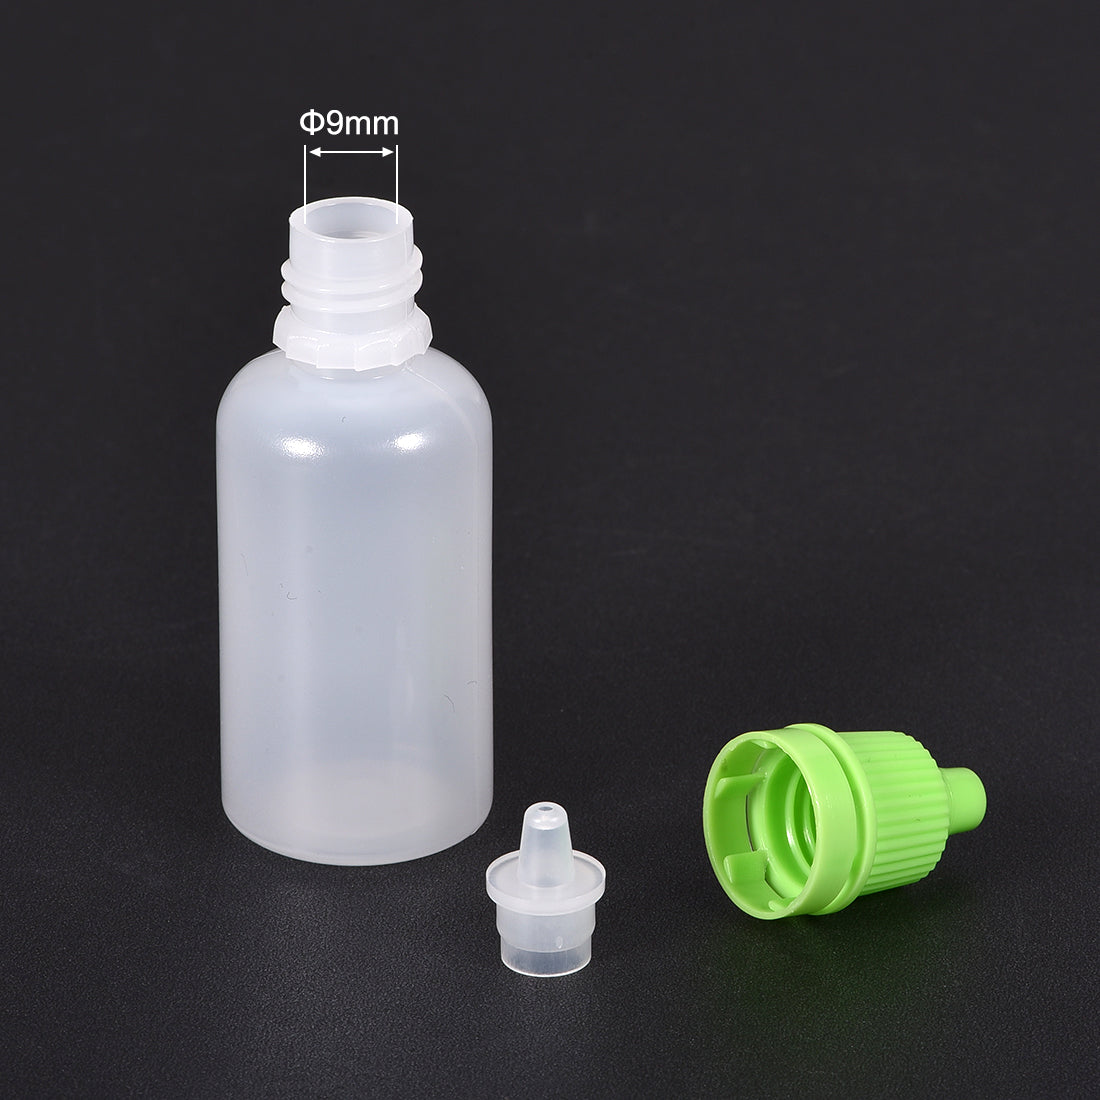 uxcell Uxcell 20ml/0.68 oz Empty Squeezable Dropper Bottle Green 20pcs